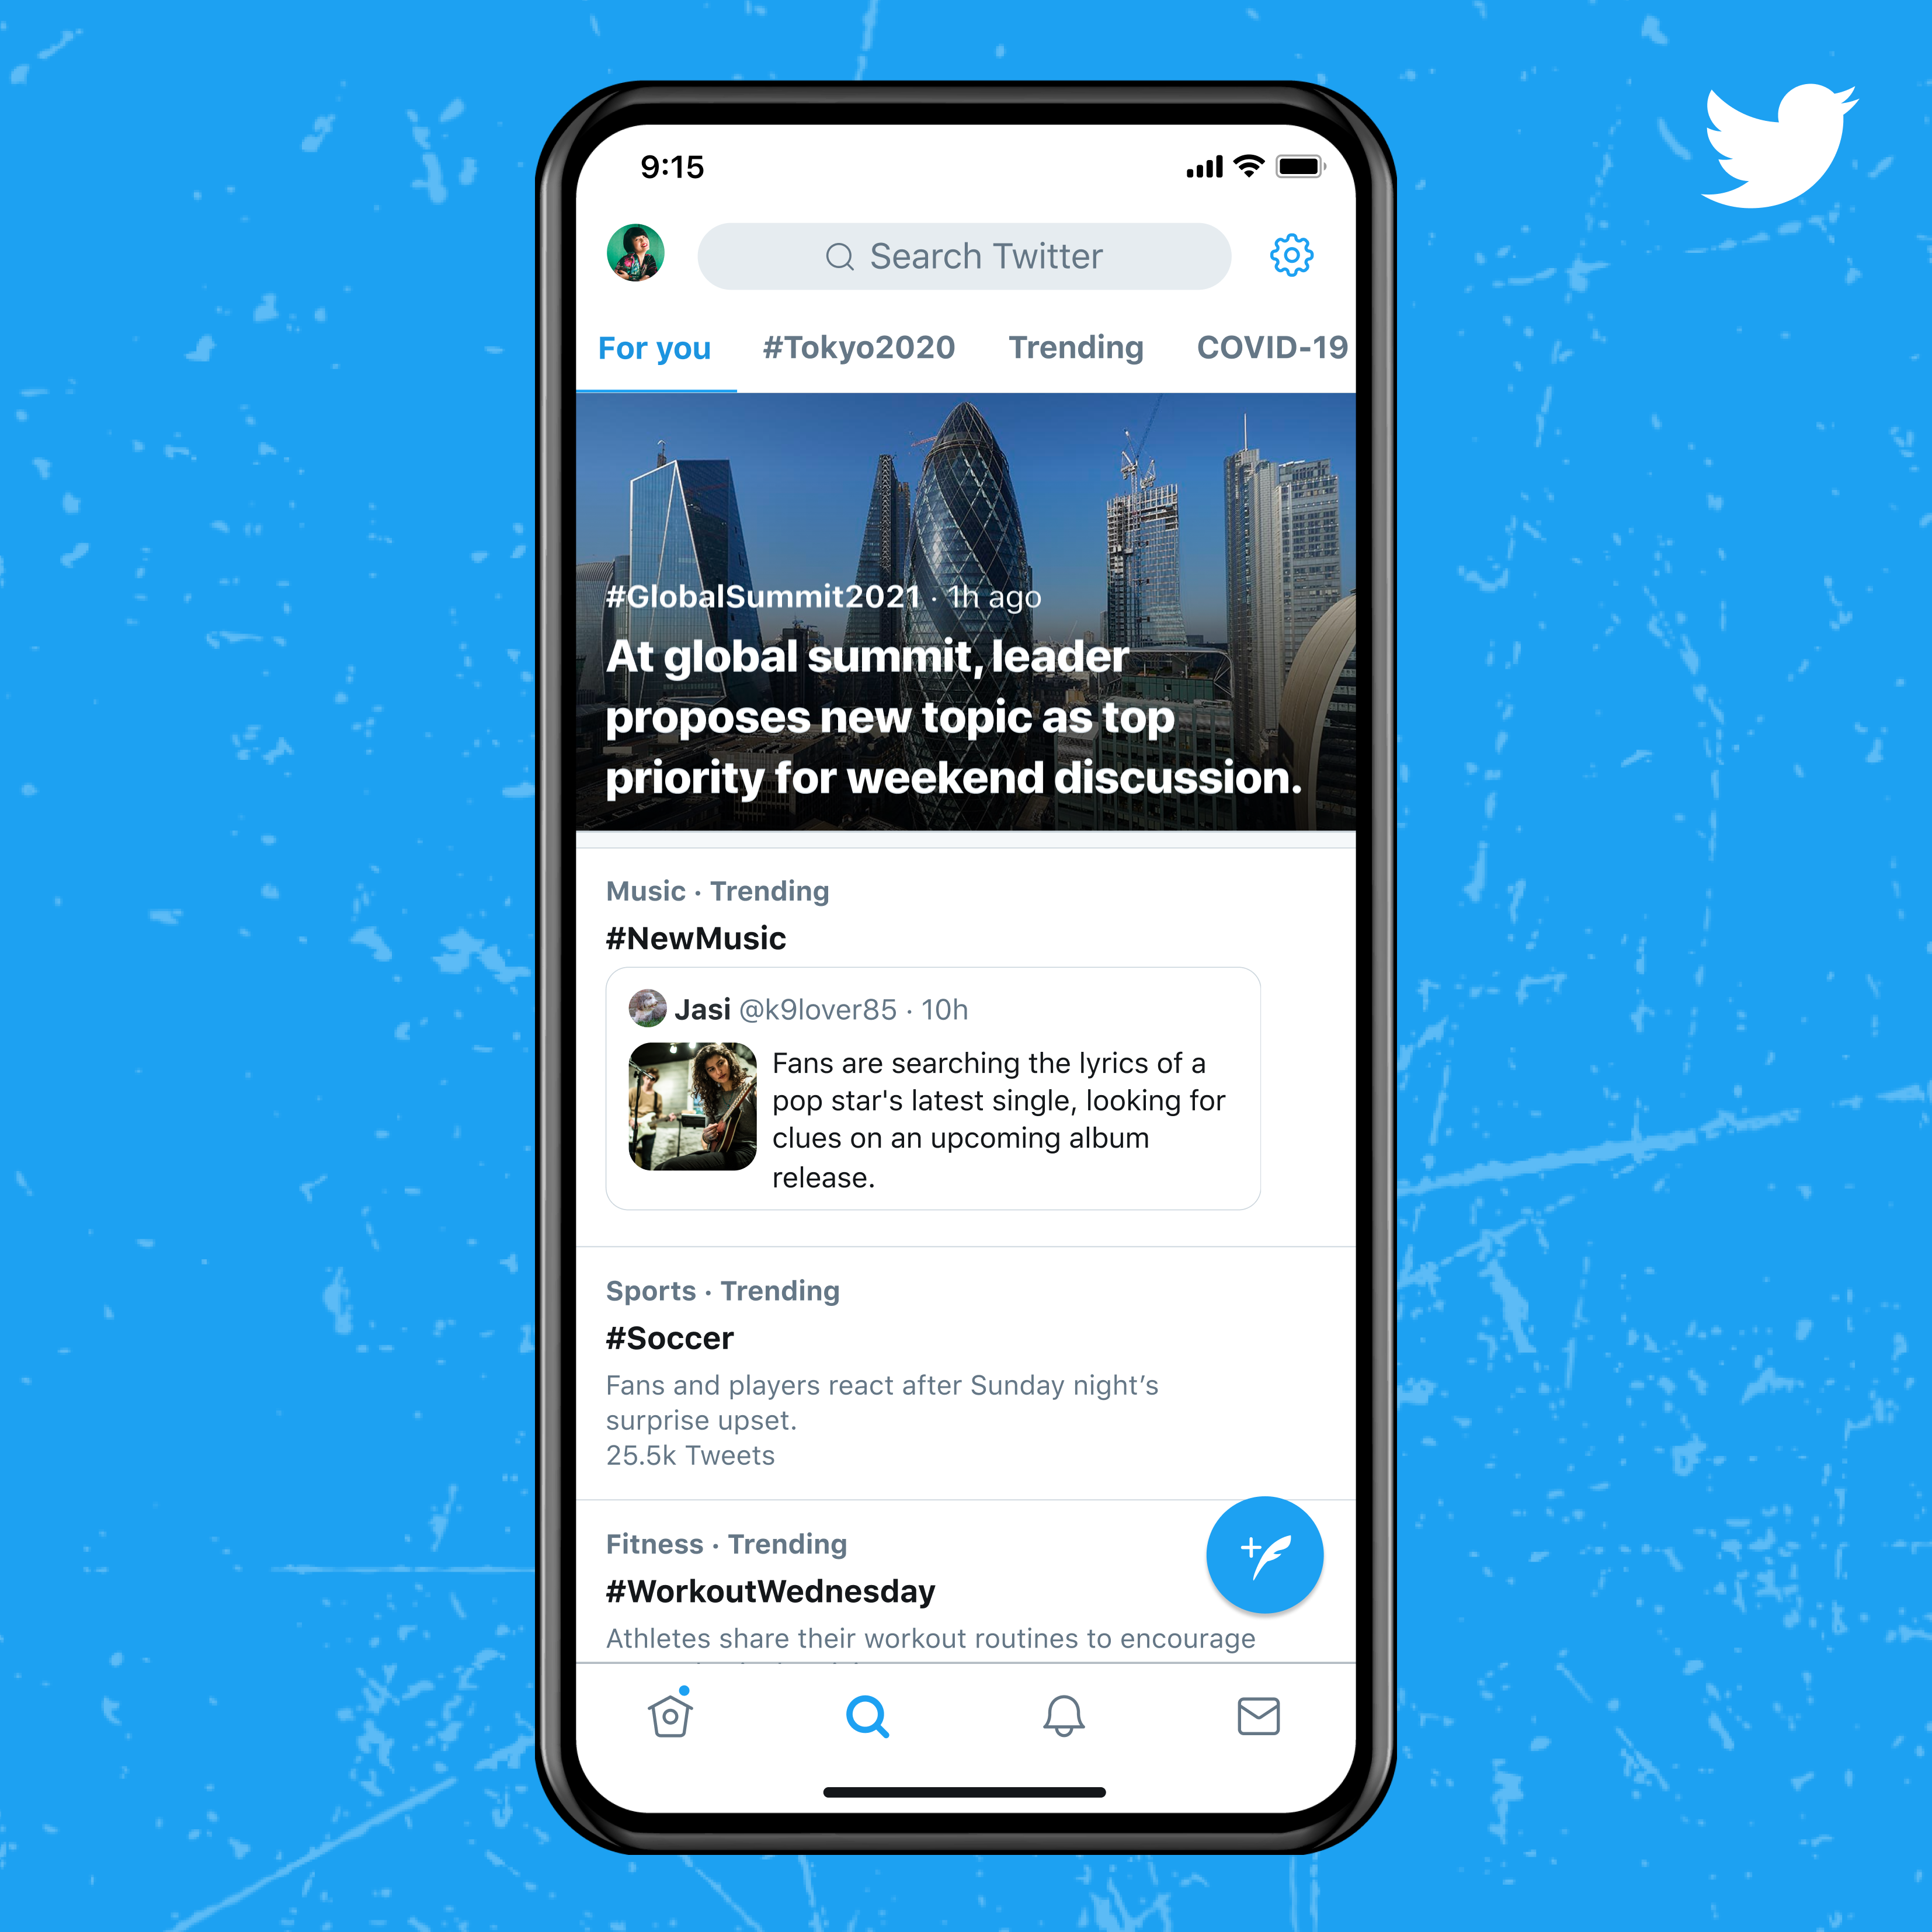 Twitter Adds More Context to Trending Topics